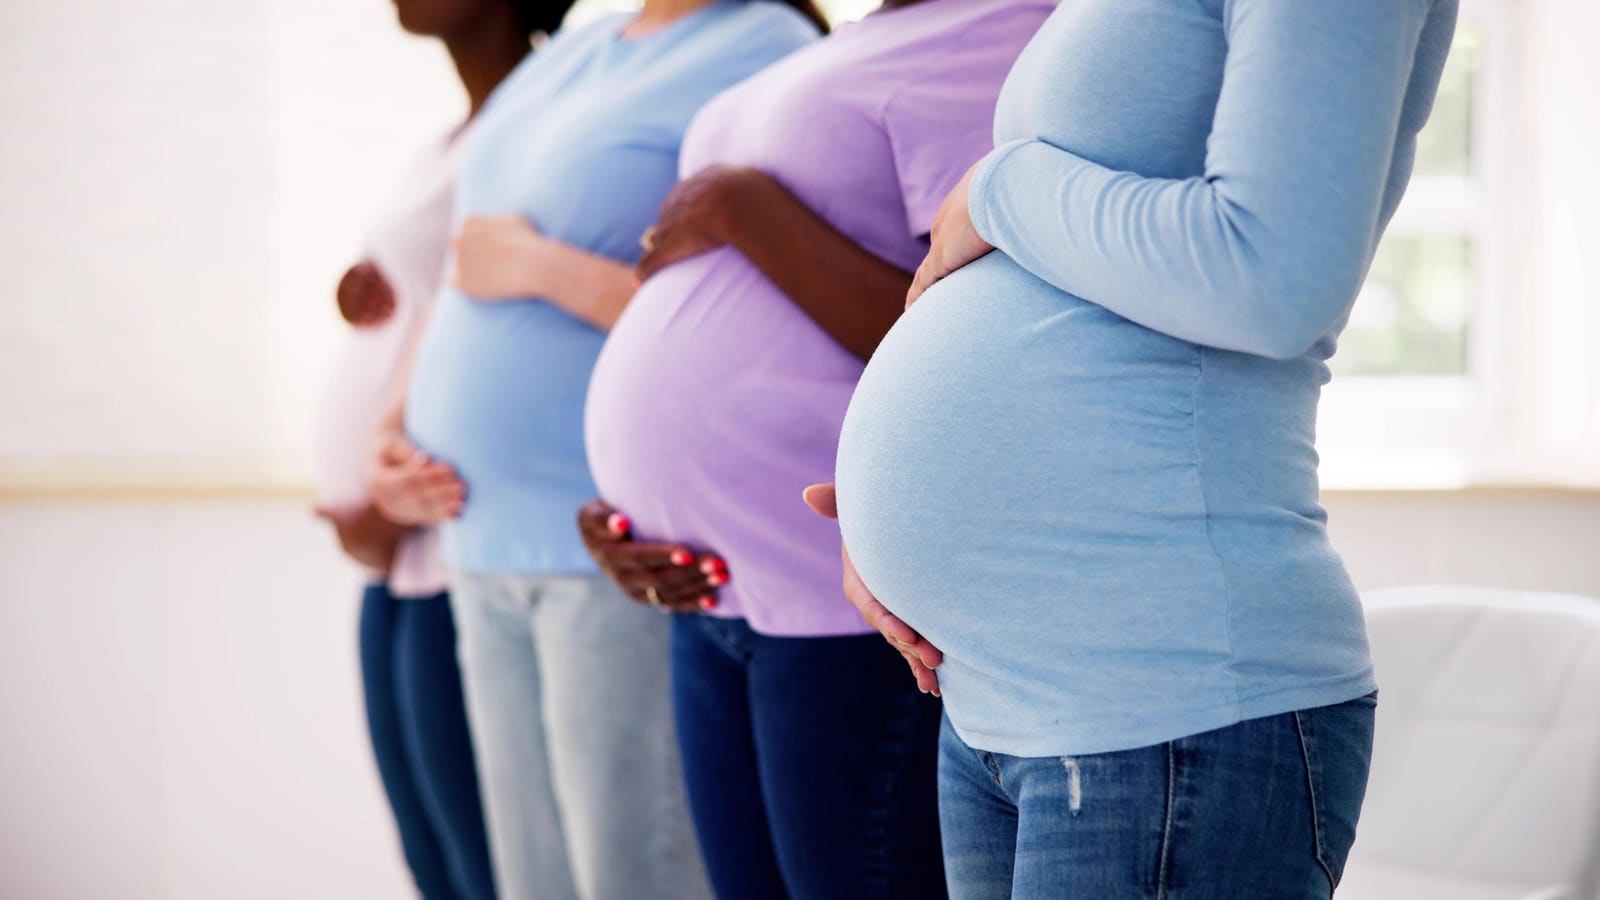 U.S. Birth Rate Drops To New Low After Pandemic ‘Baby Bump’